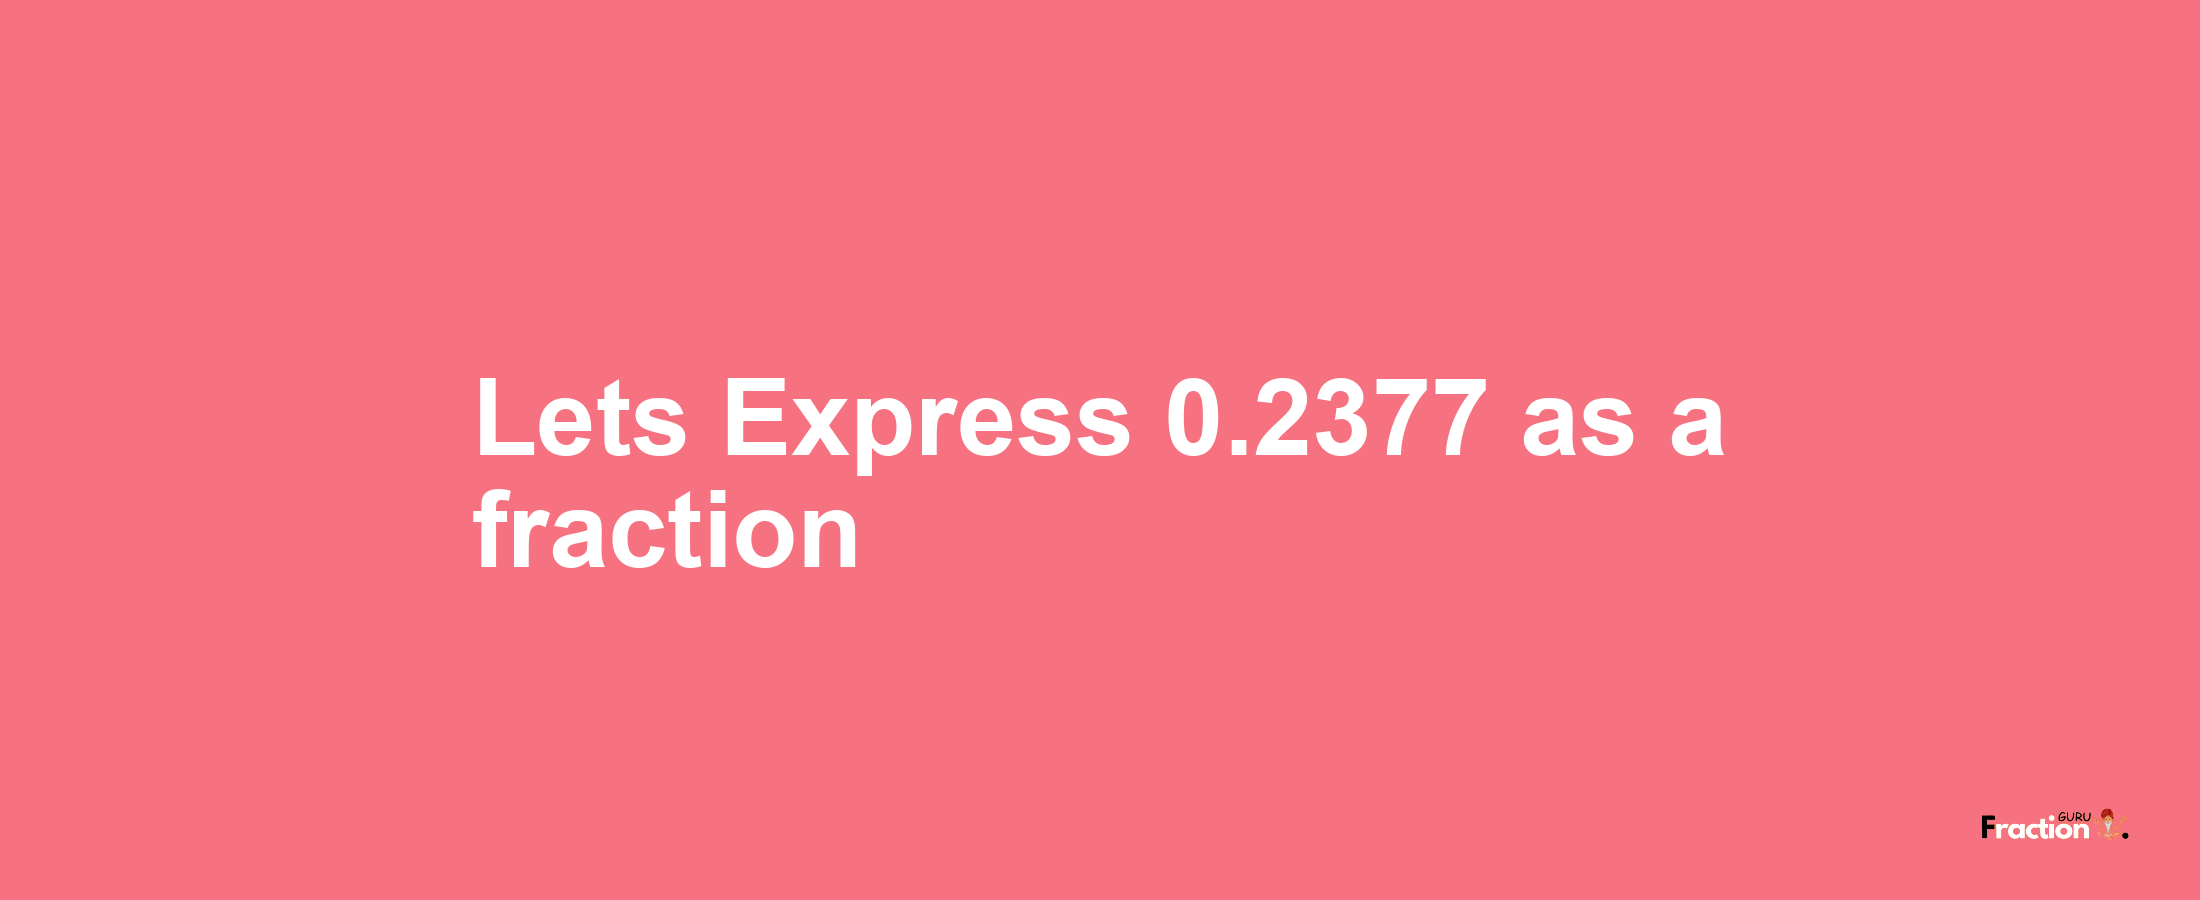 Lets Express 0.2377 as afraction